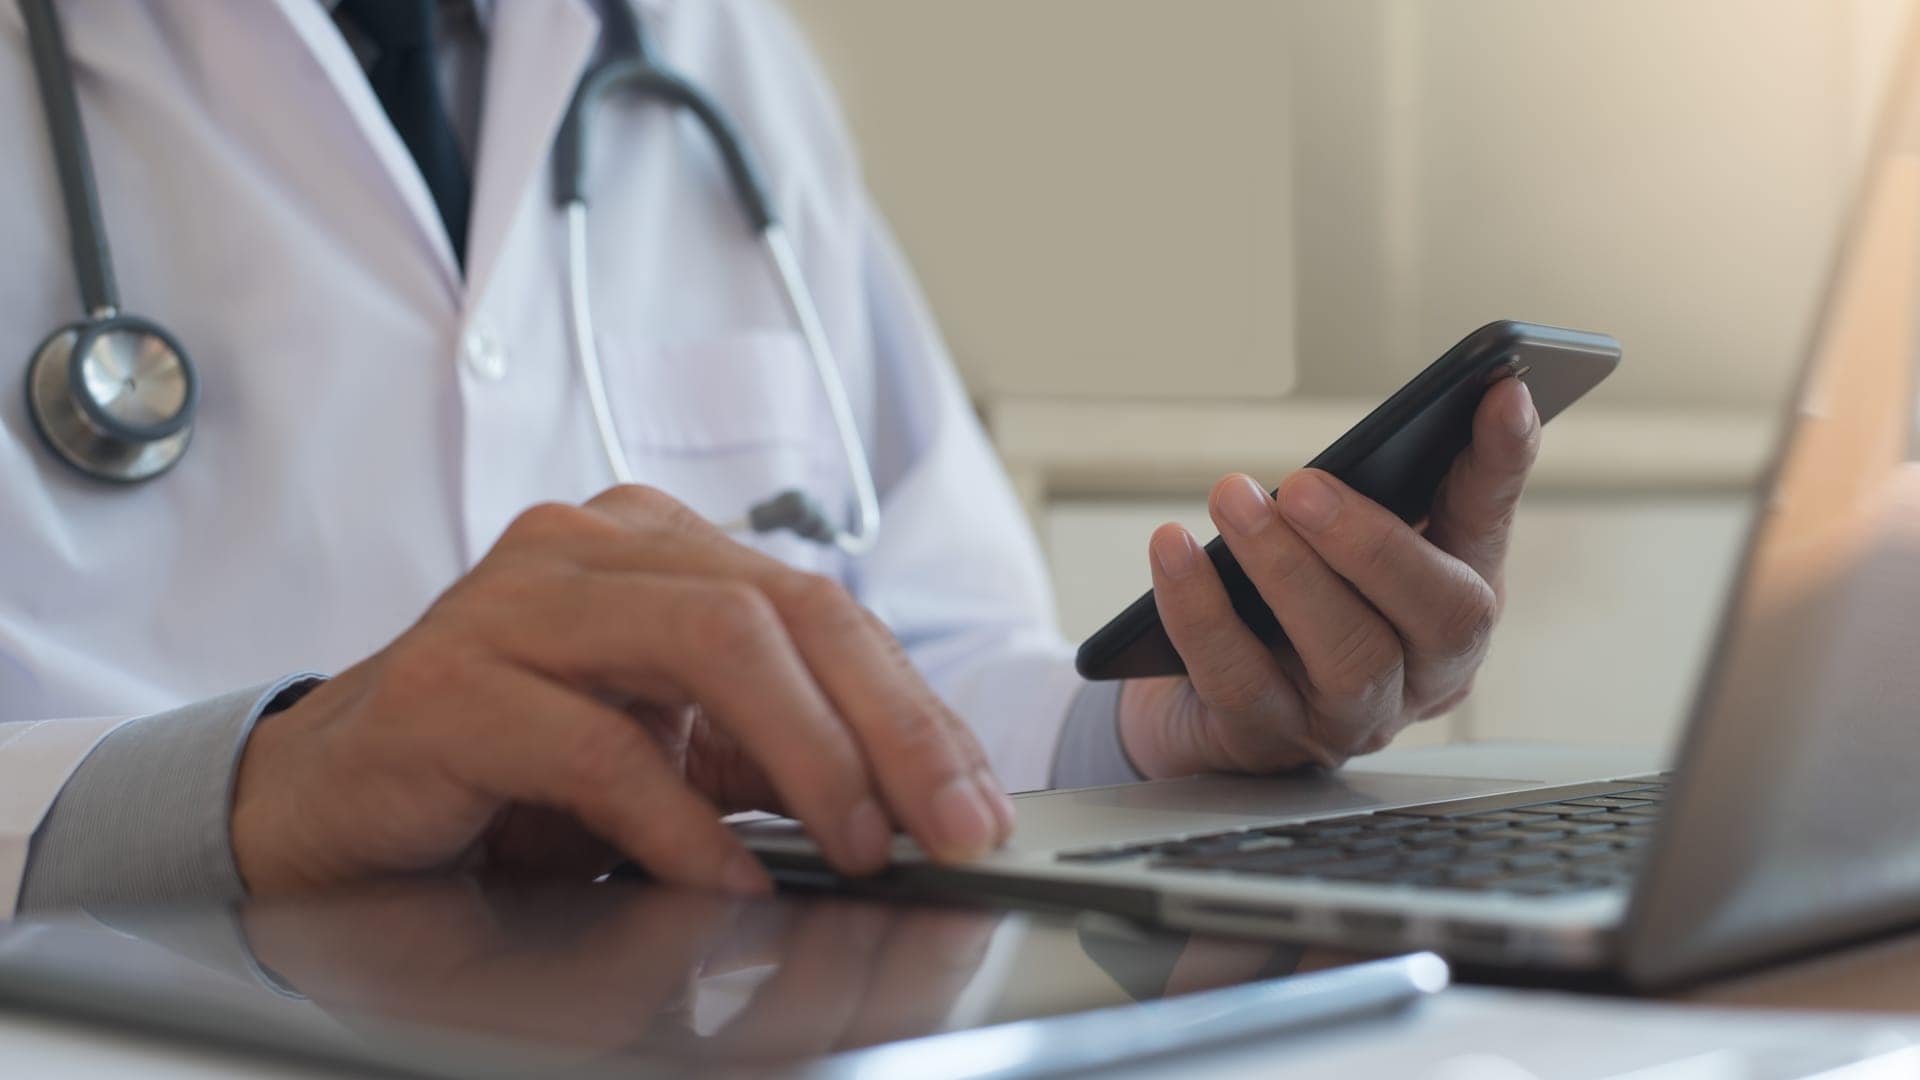 Digital dictation and the benefits for the medical sector - News